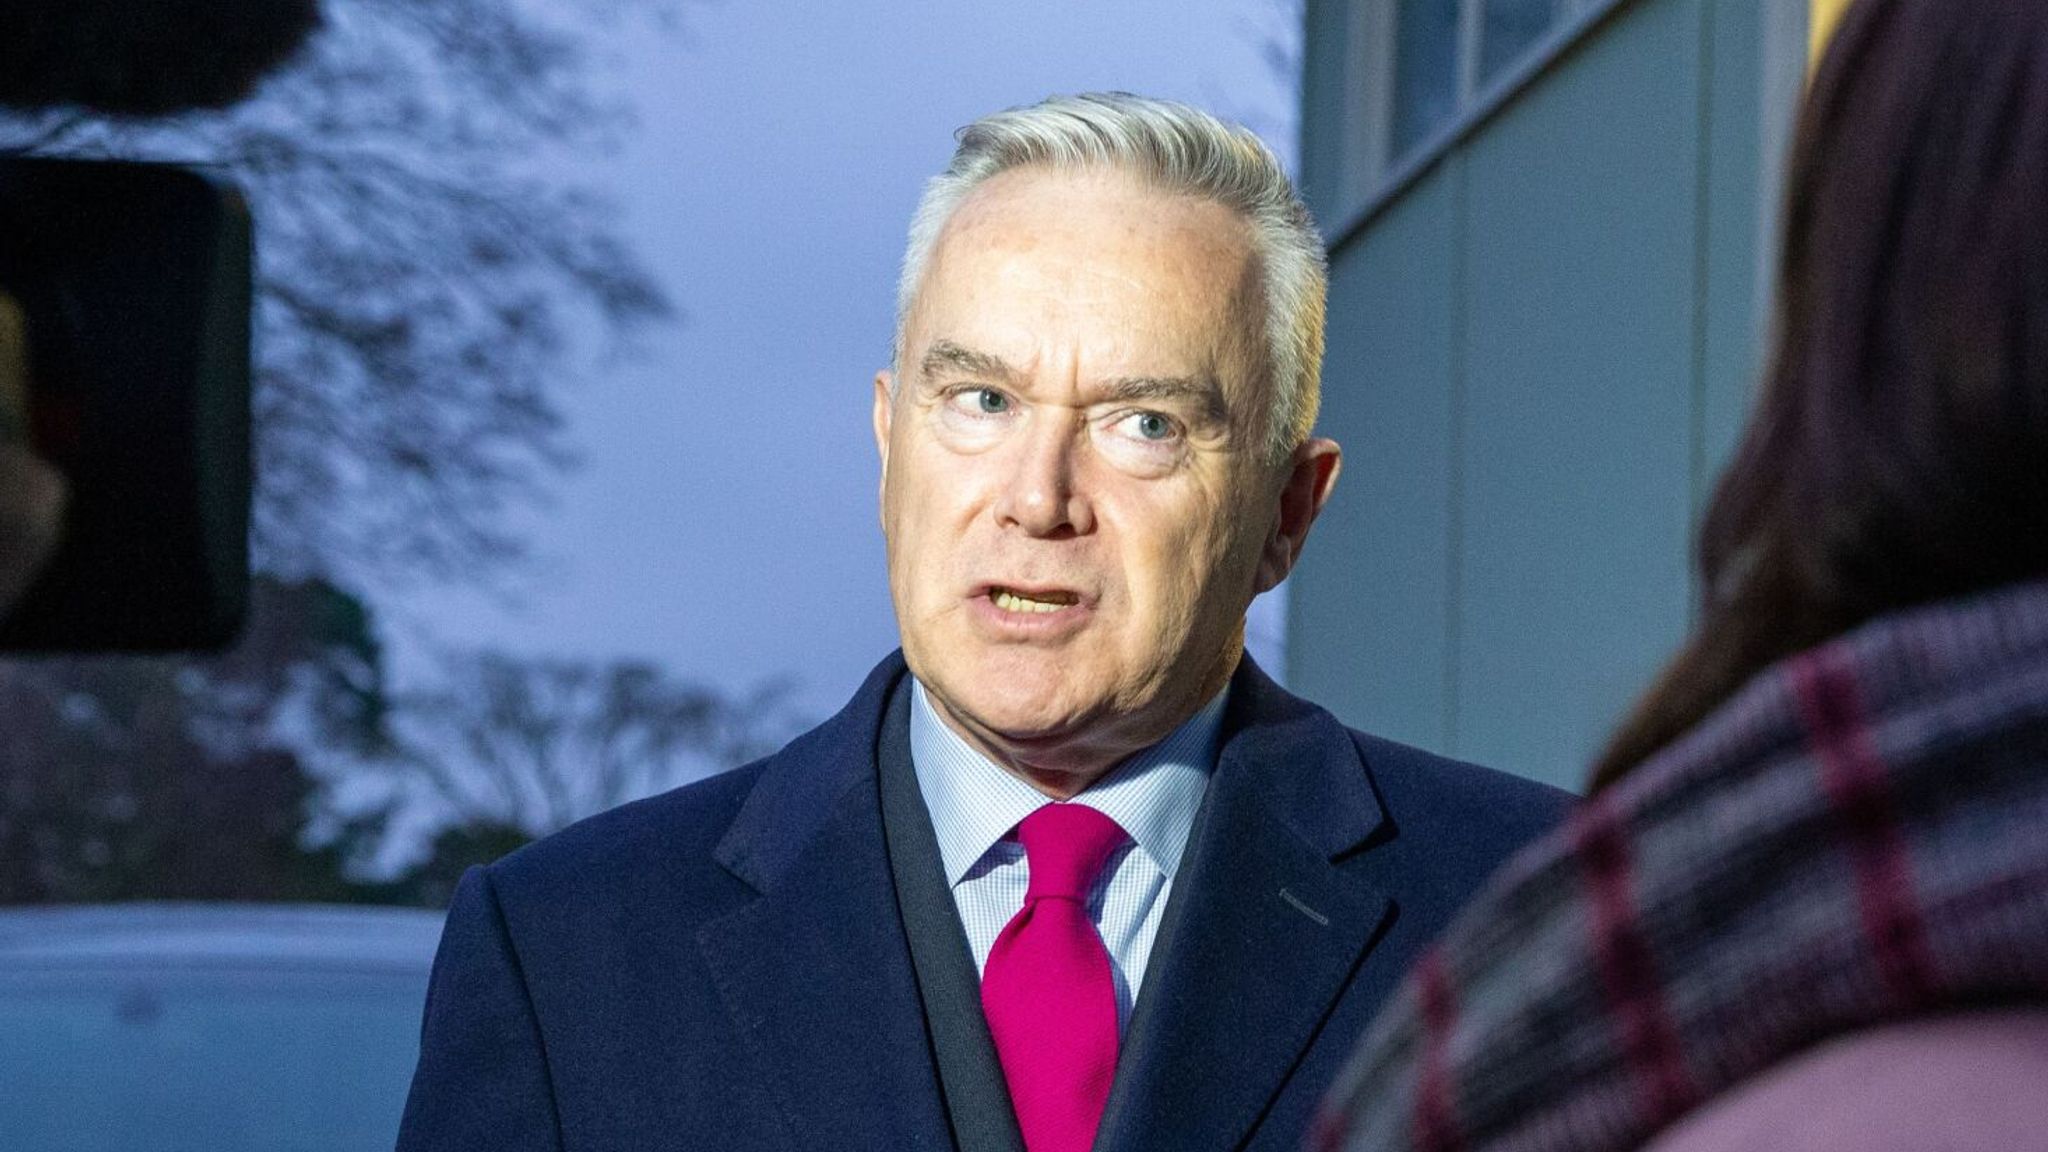 Huw Edwards scandal BBC in touch with family of person at centre of explicit photos allegations